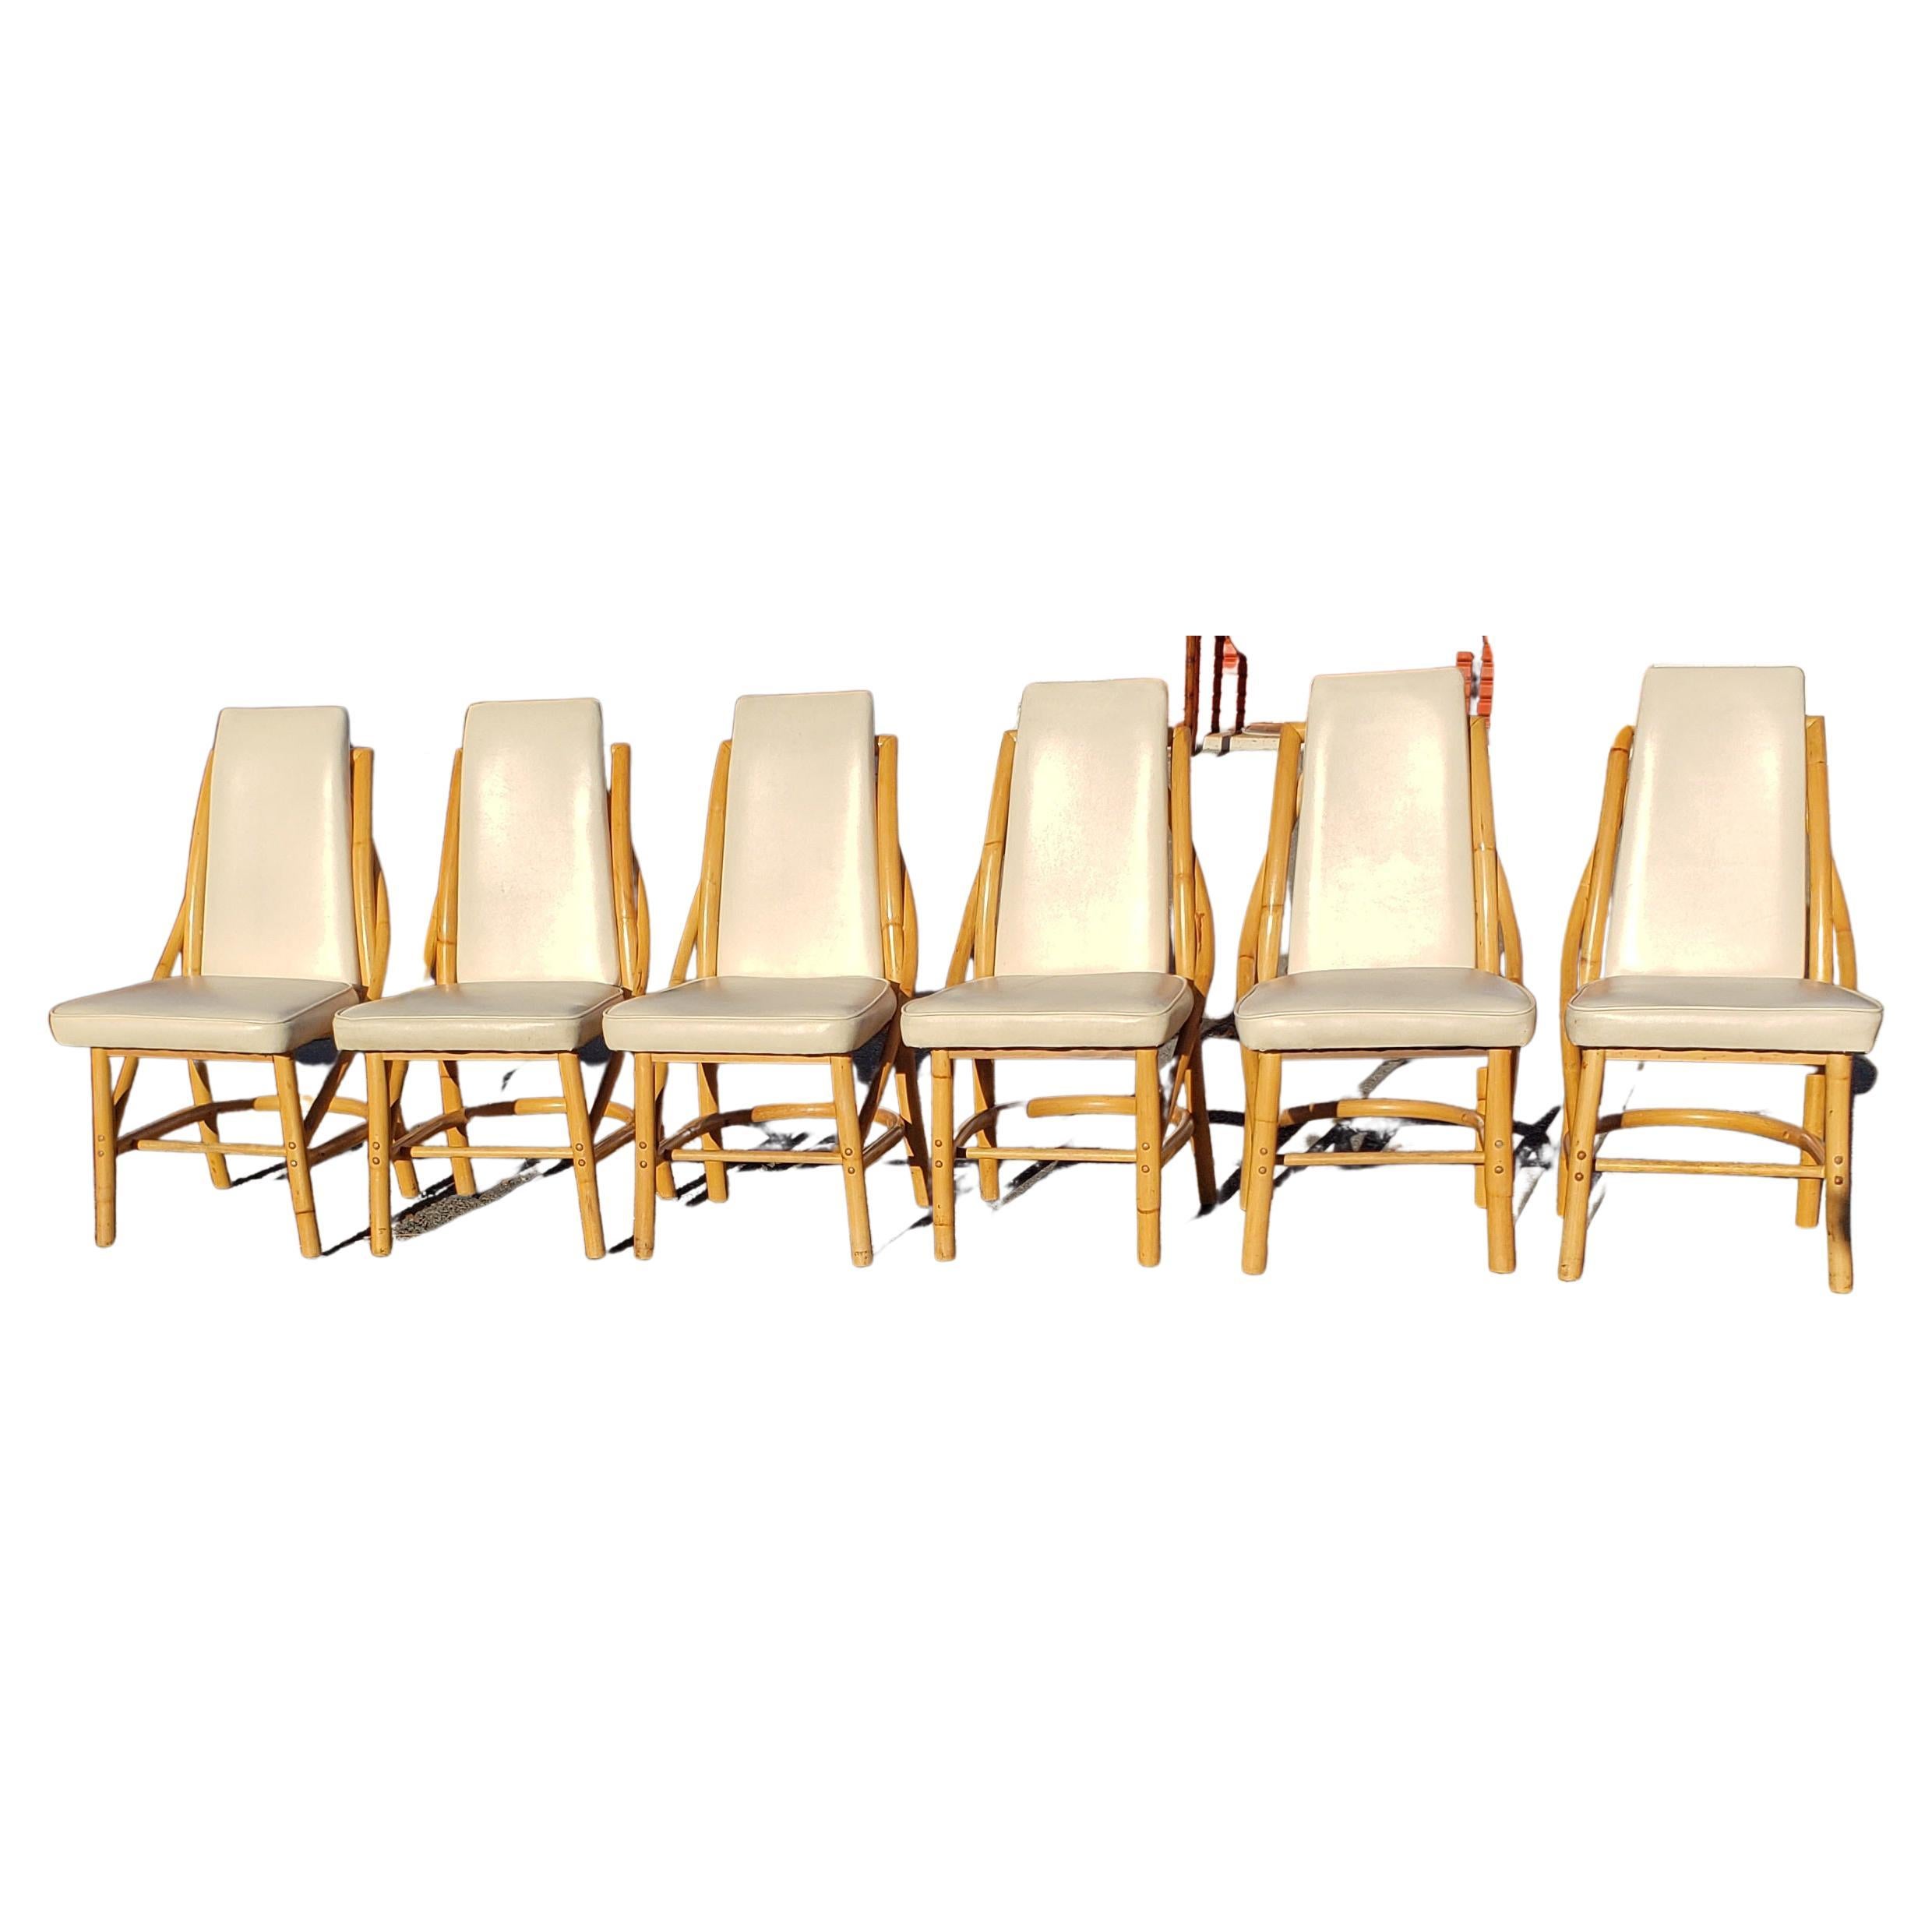 Bam Tan Rattan Bamboo Dining Chairs, Circa 1960s In Good Condition For Sale In Germantown, MD